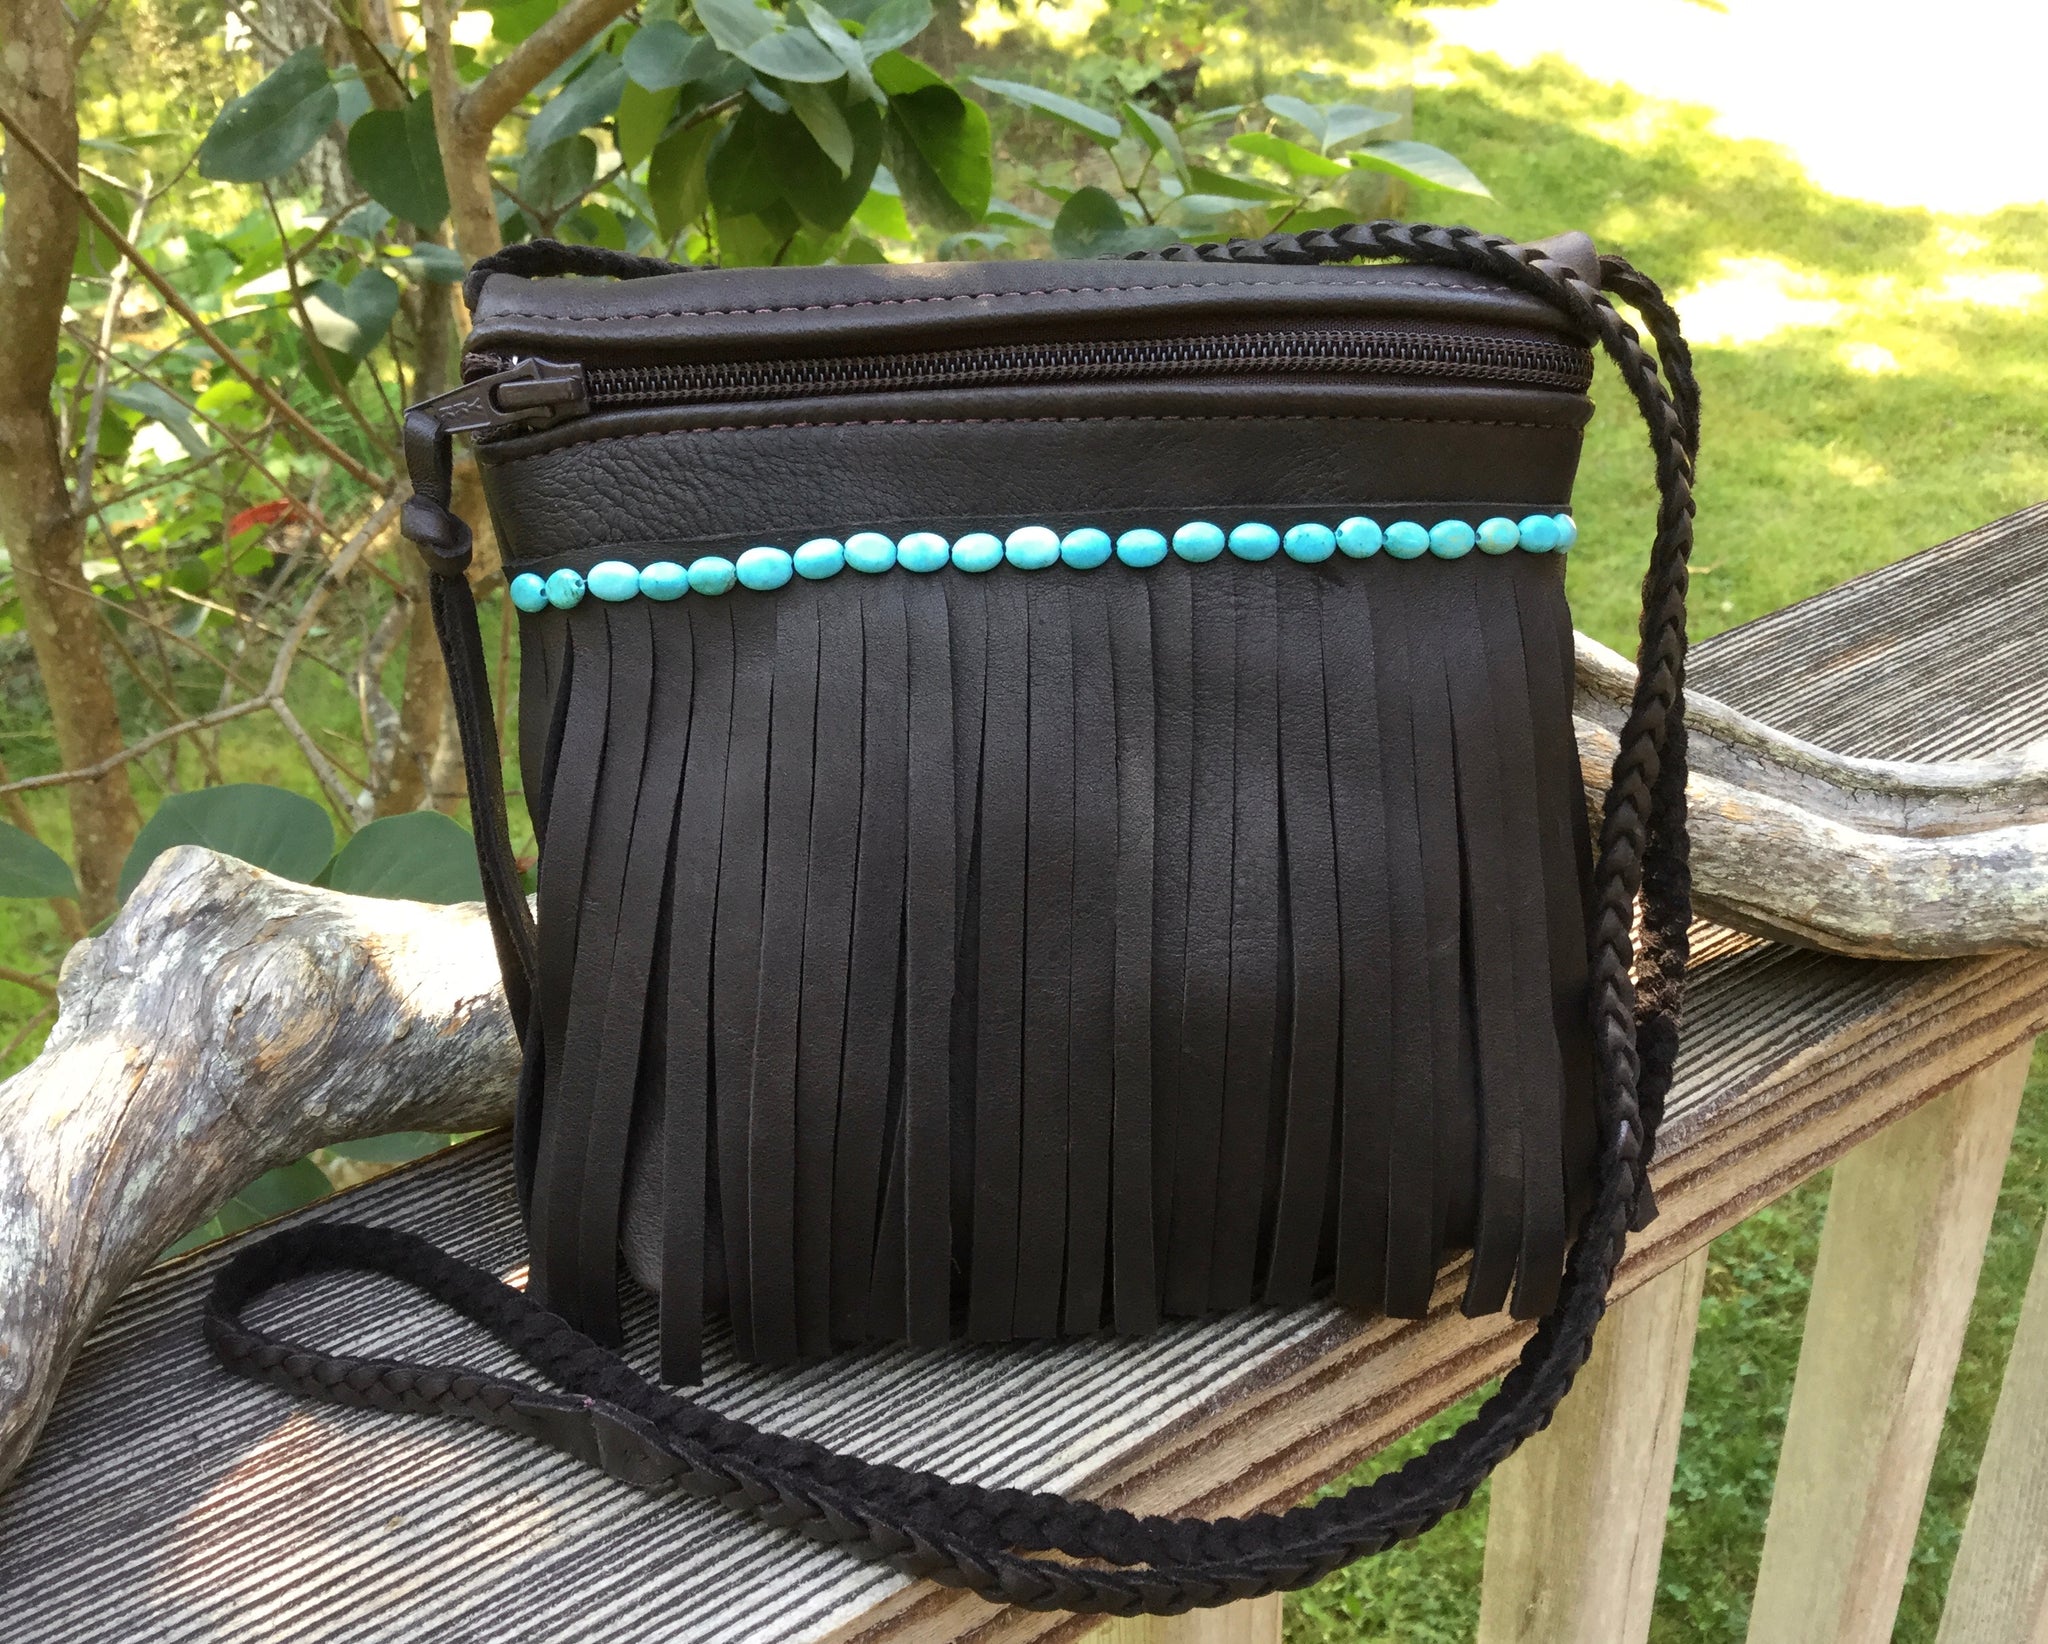 CROSSBODY BAG WITH BEADS AND FRINGING - Black